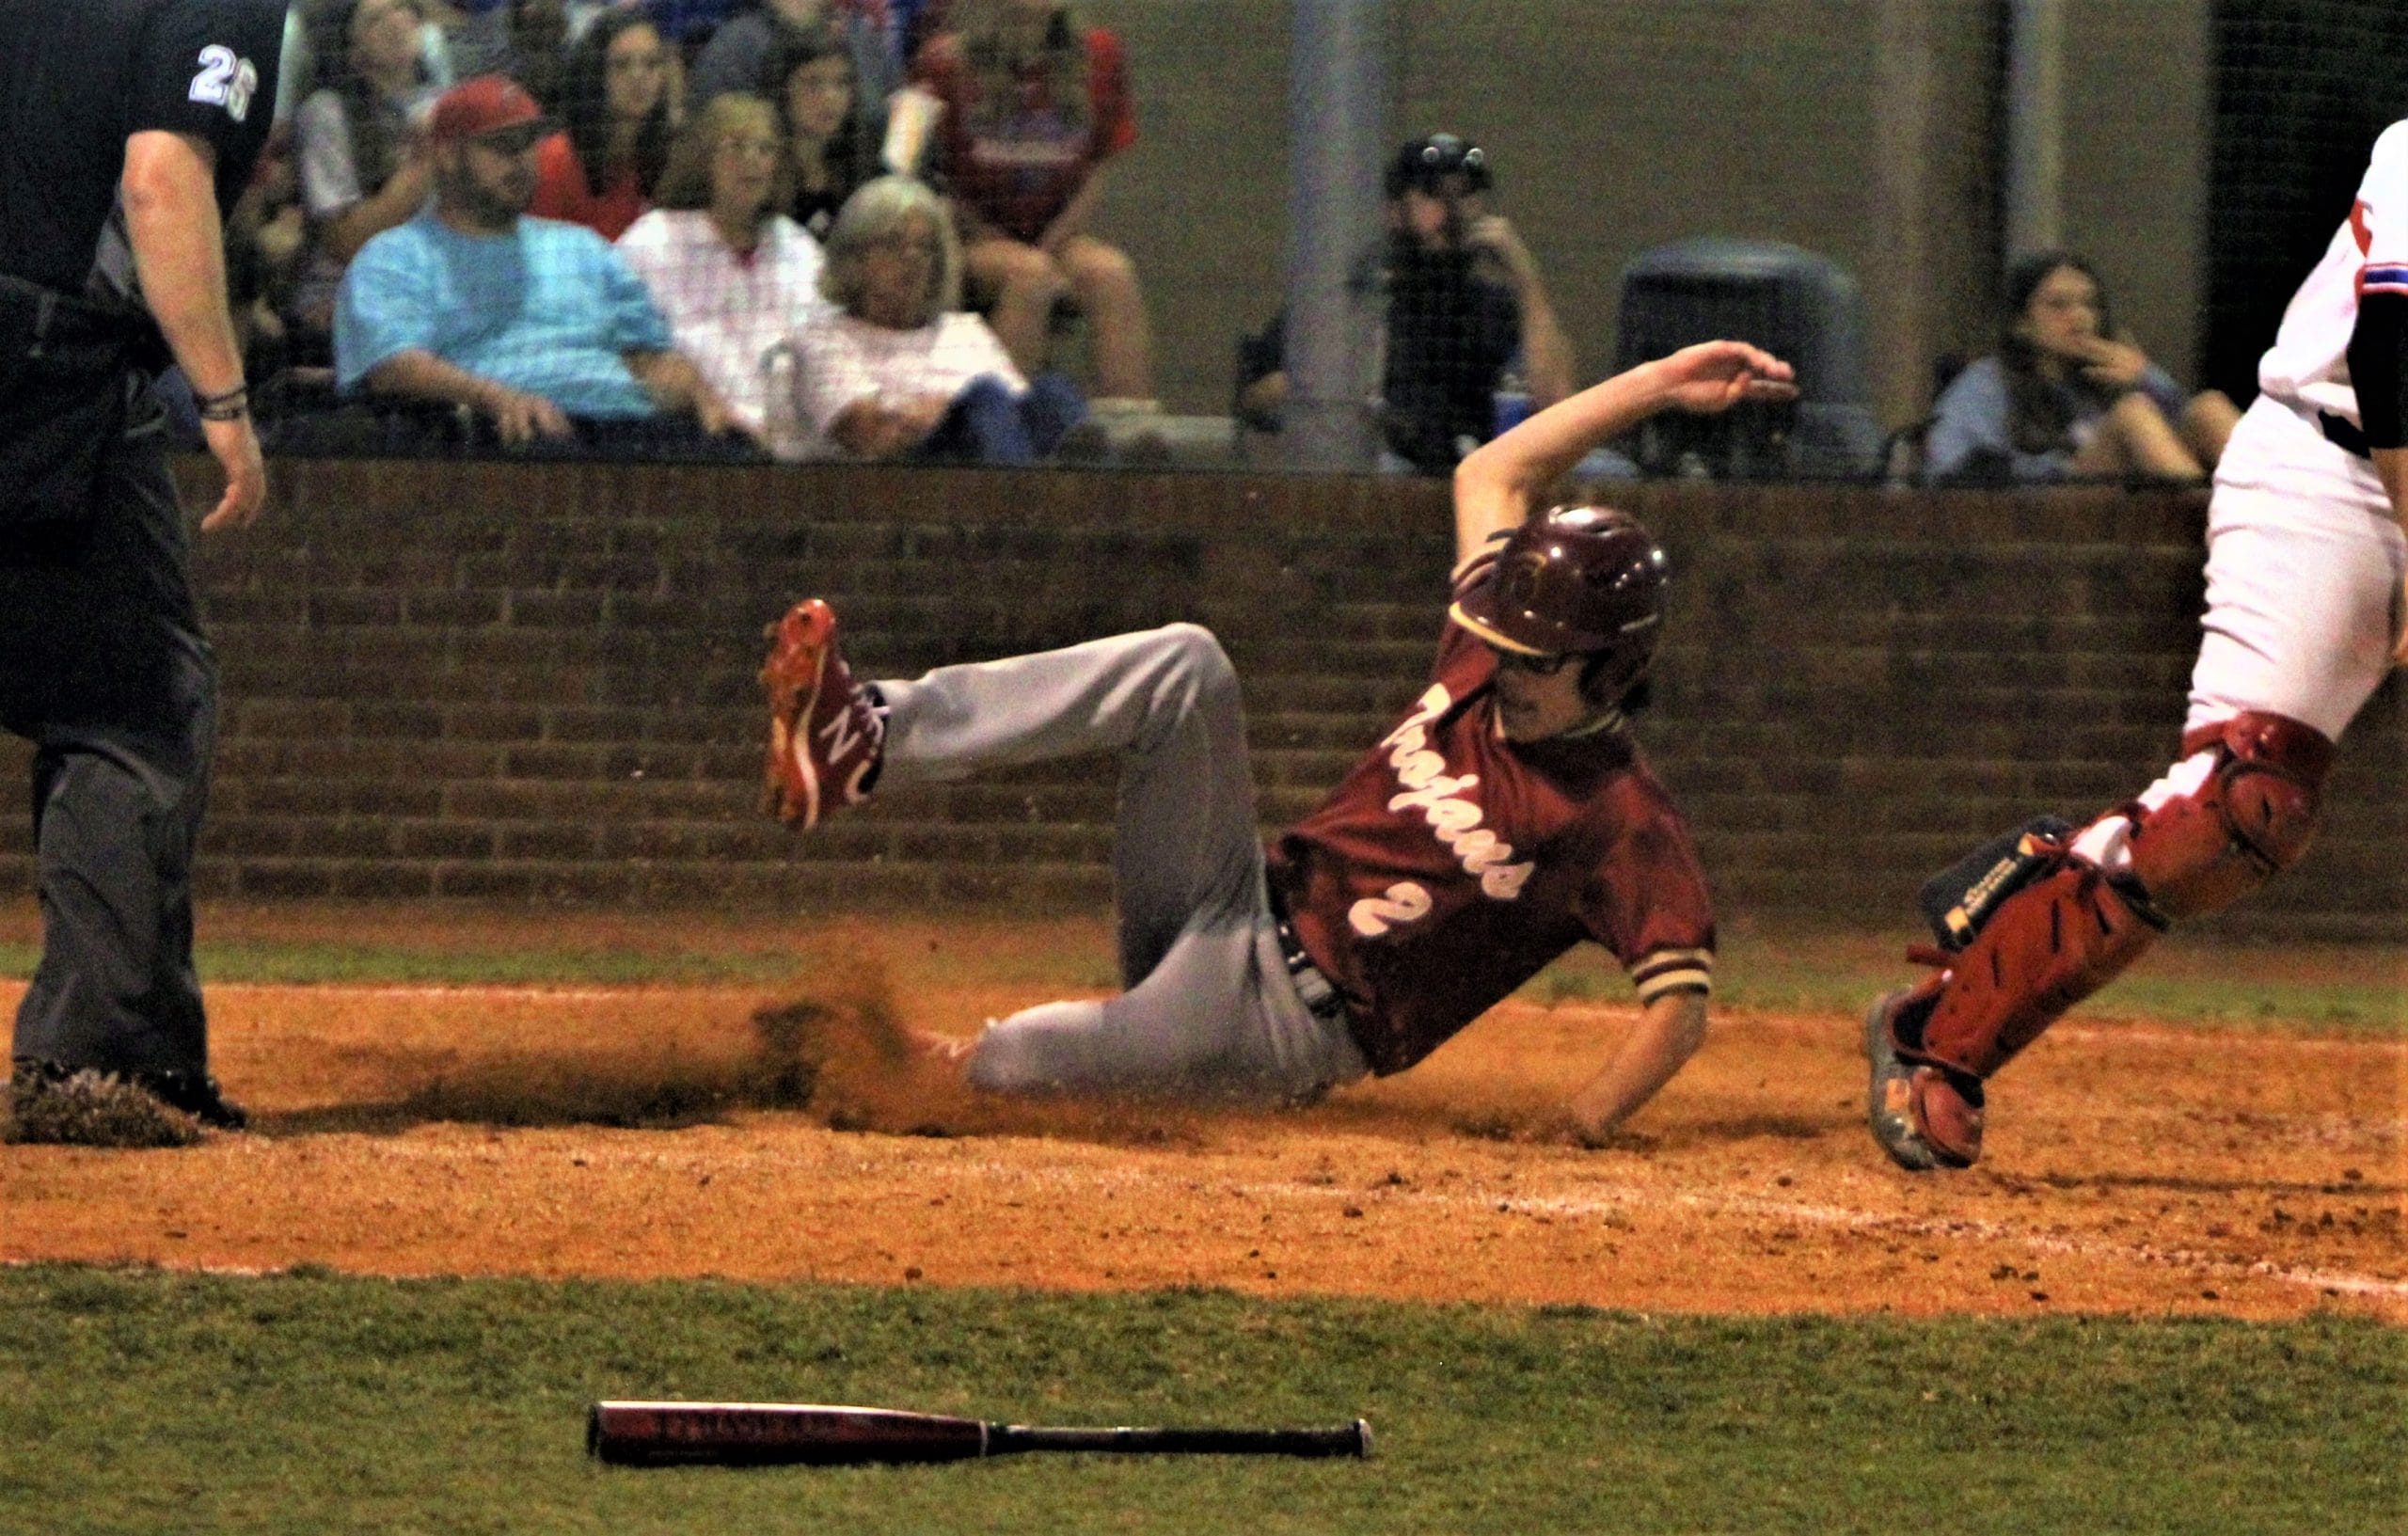 Central breaks through to win, 6-4, at Western Harnett